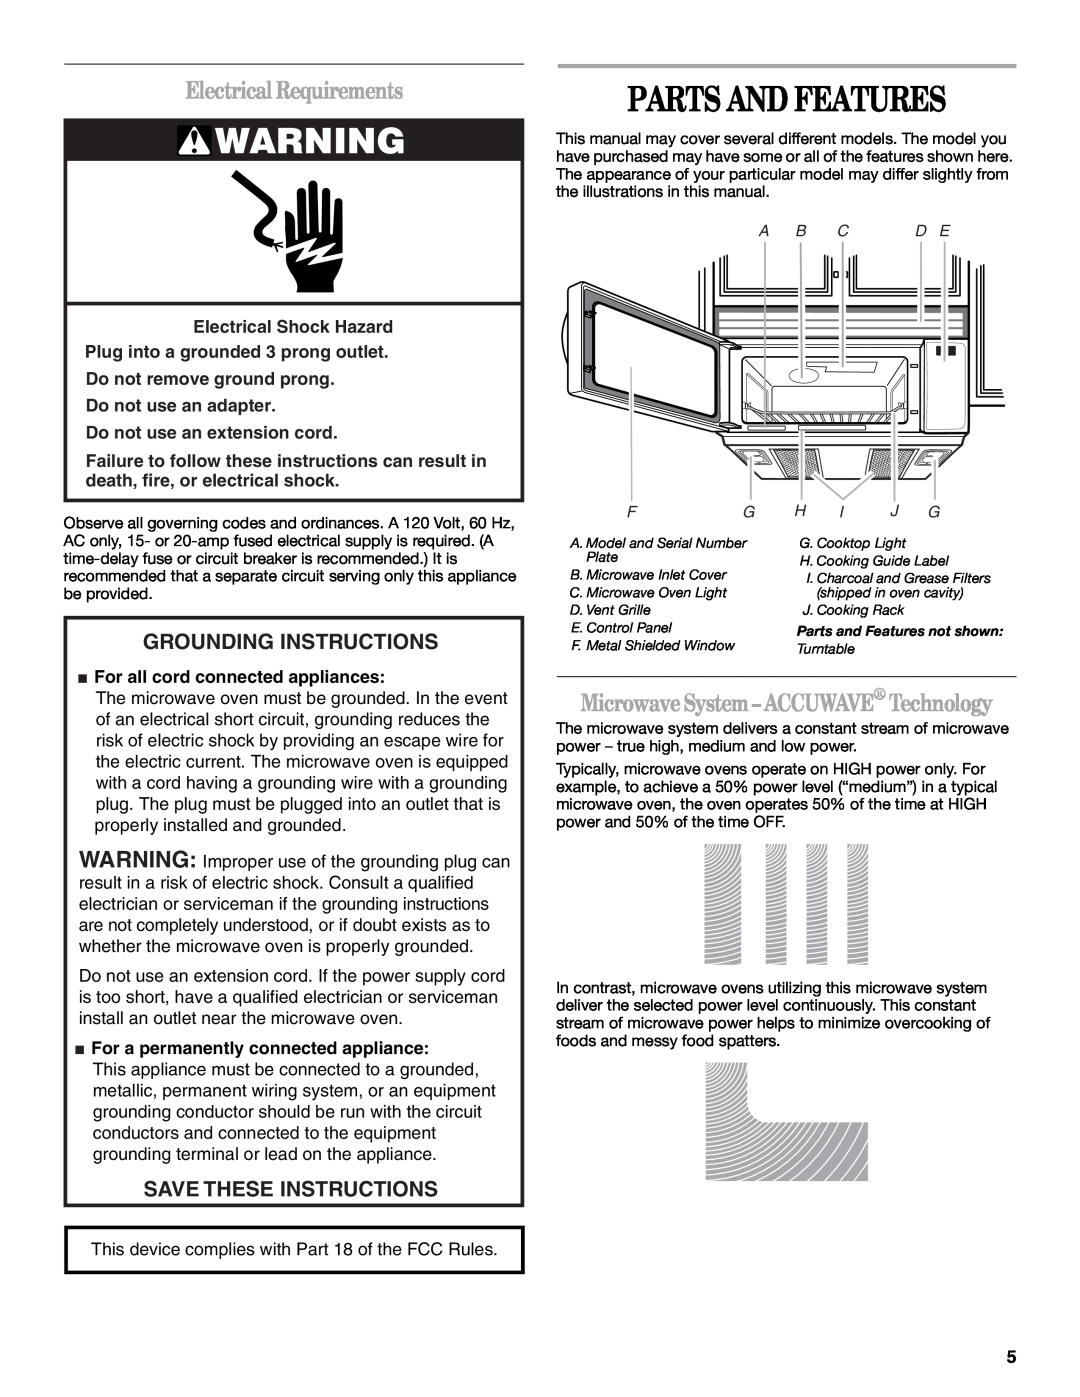 Whirlpool Model GH5184XP Parts And Features, Electrical Requirements, Grounding Instructions, Save These Instructions 